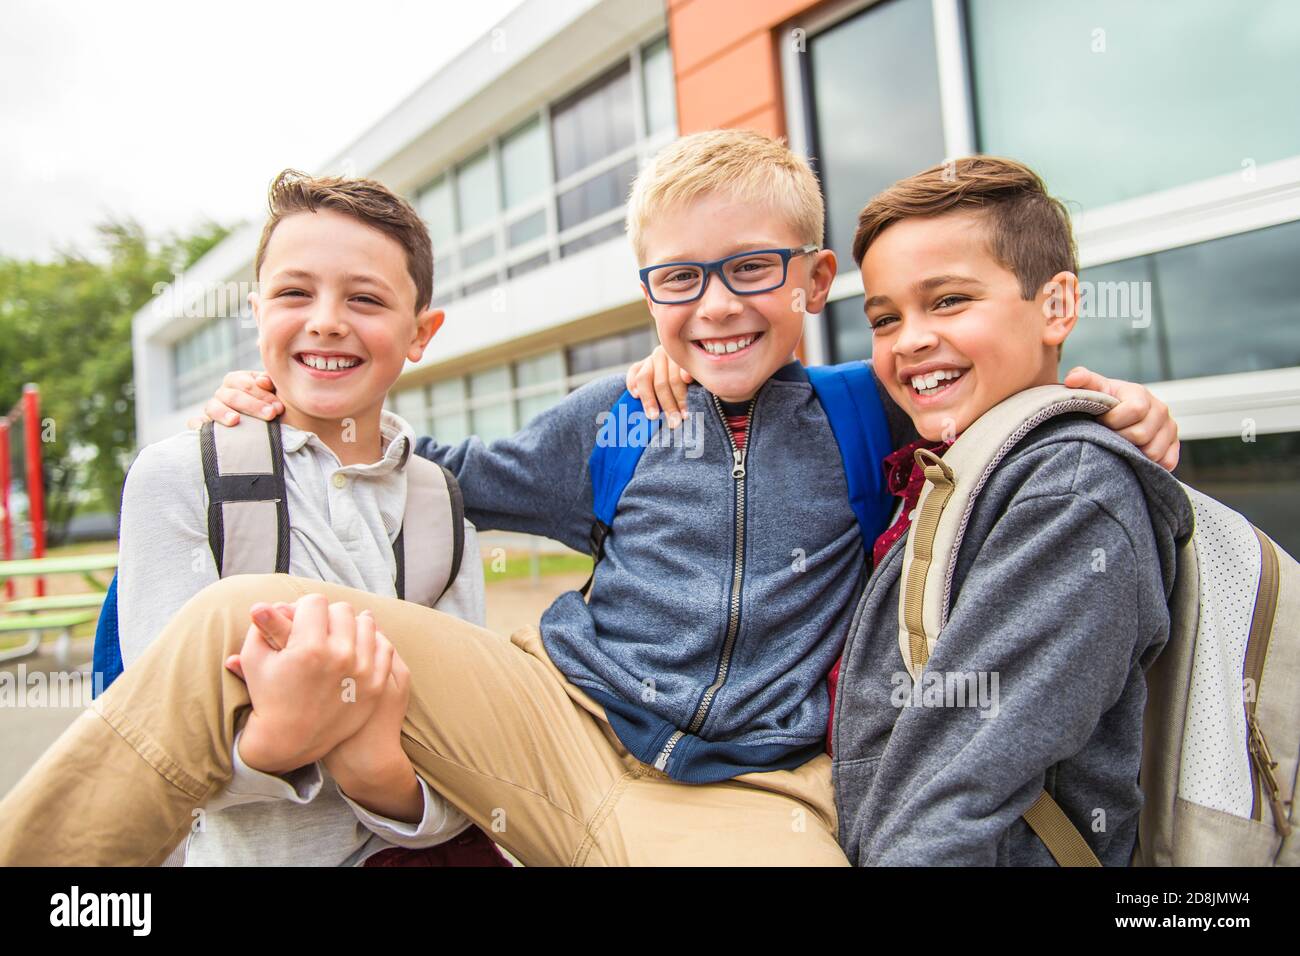 group of kids on the school background having fun Stock Photo